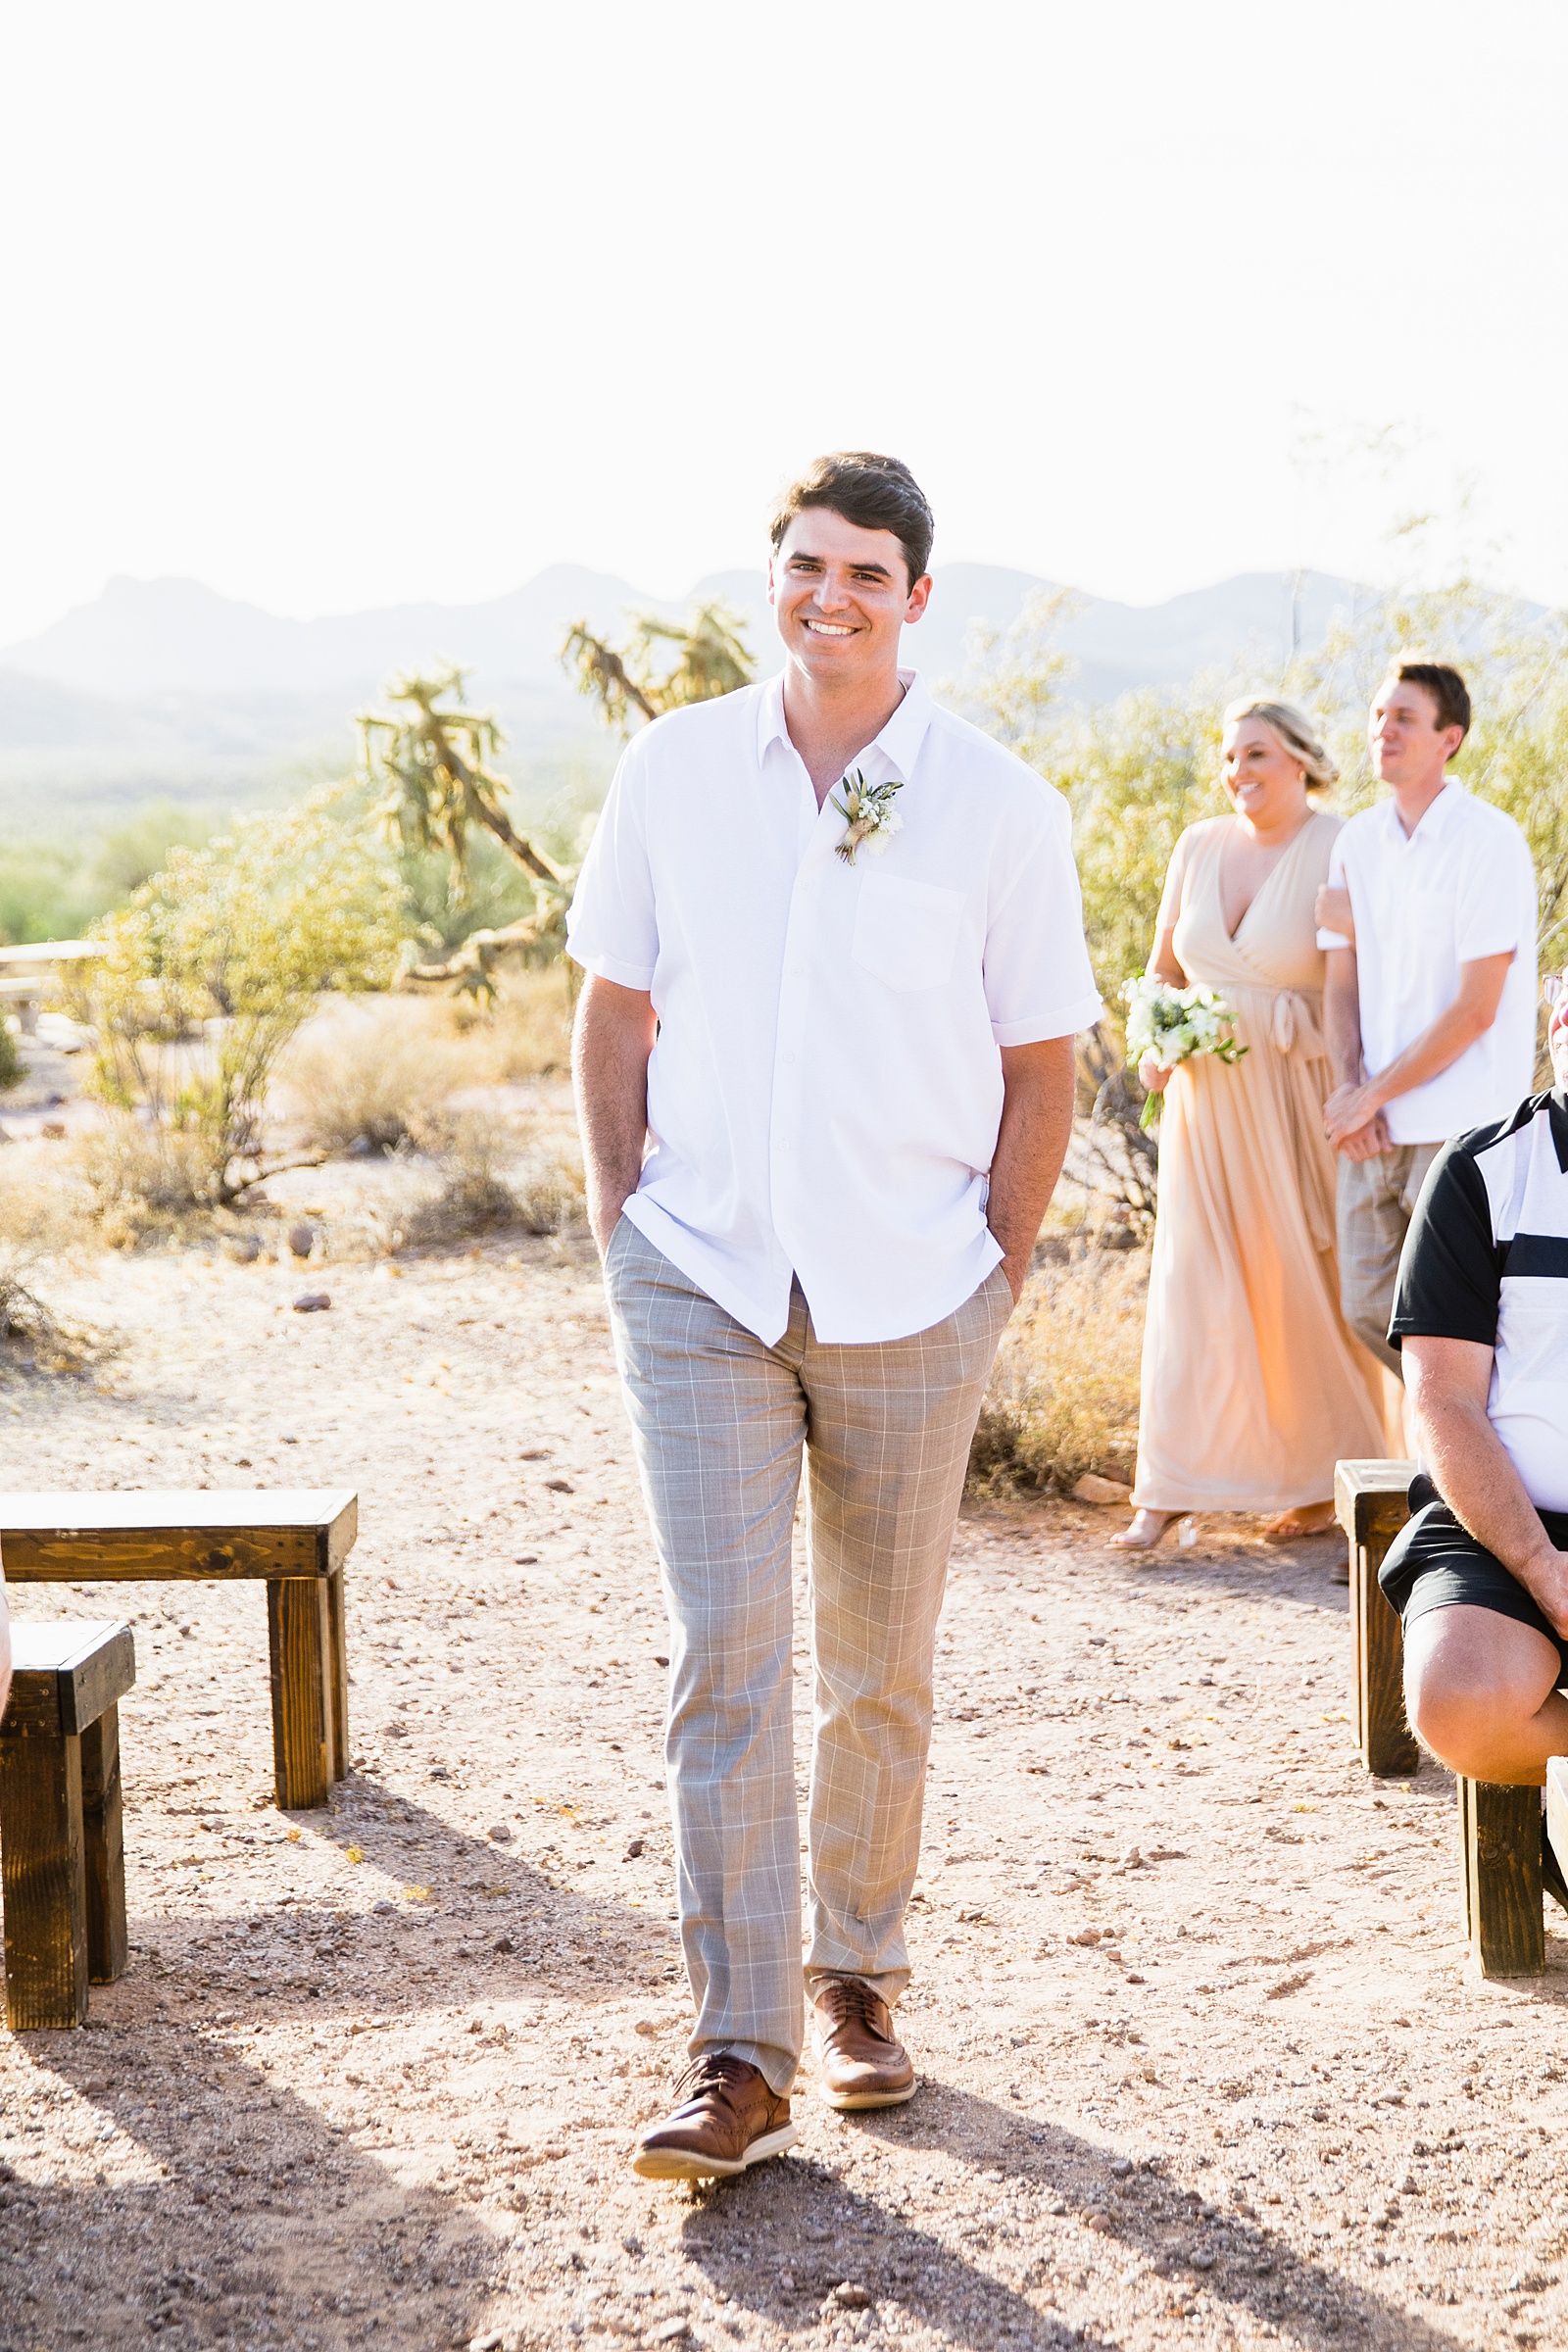 Groom walking down aisle during Superstition Mountain Micro wedding ceremony by Phoenix wedding photographer PMA Photography.